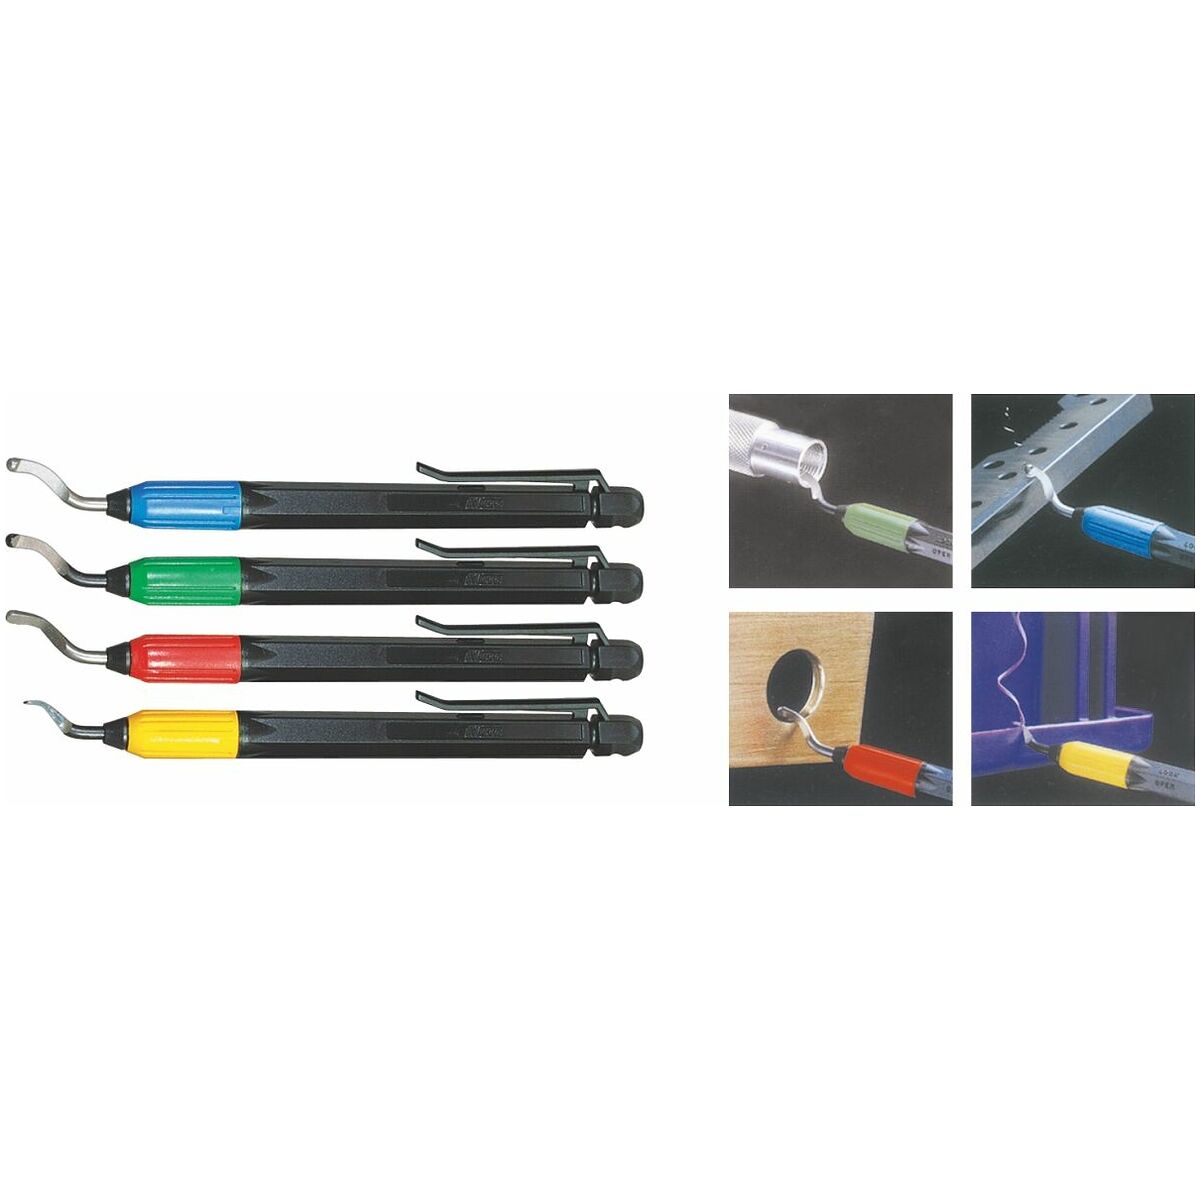 Universal deburrer set (4 holders, each with 1 blade)